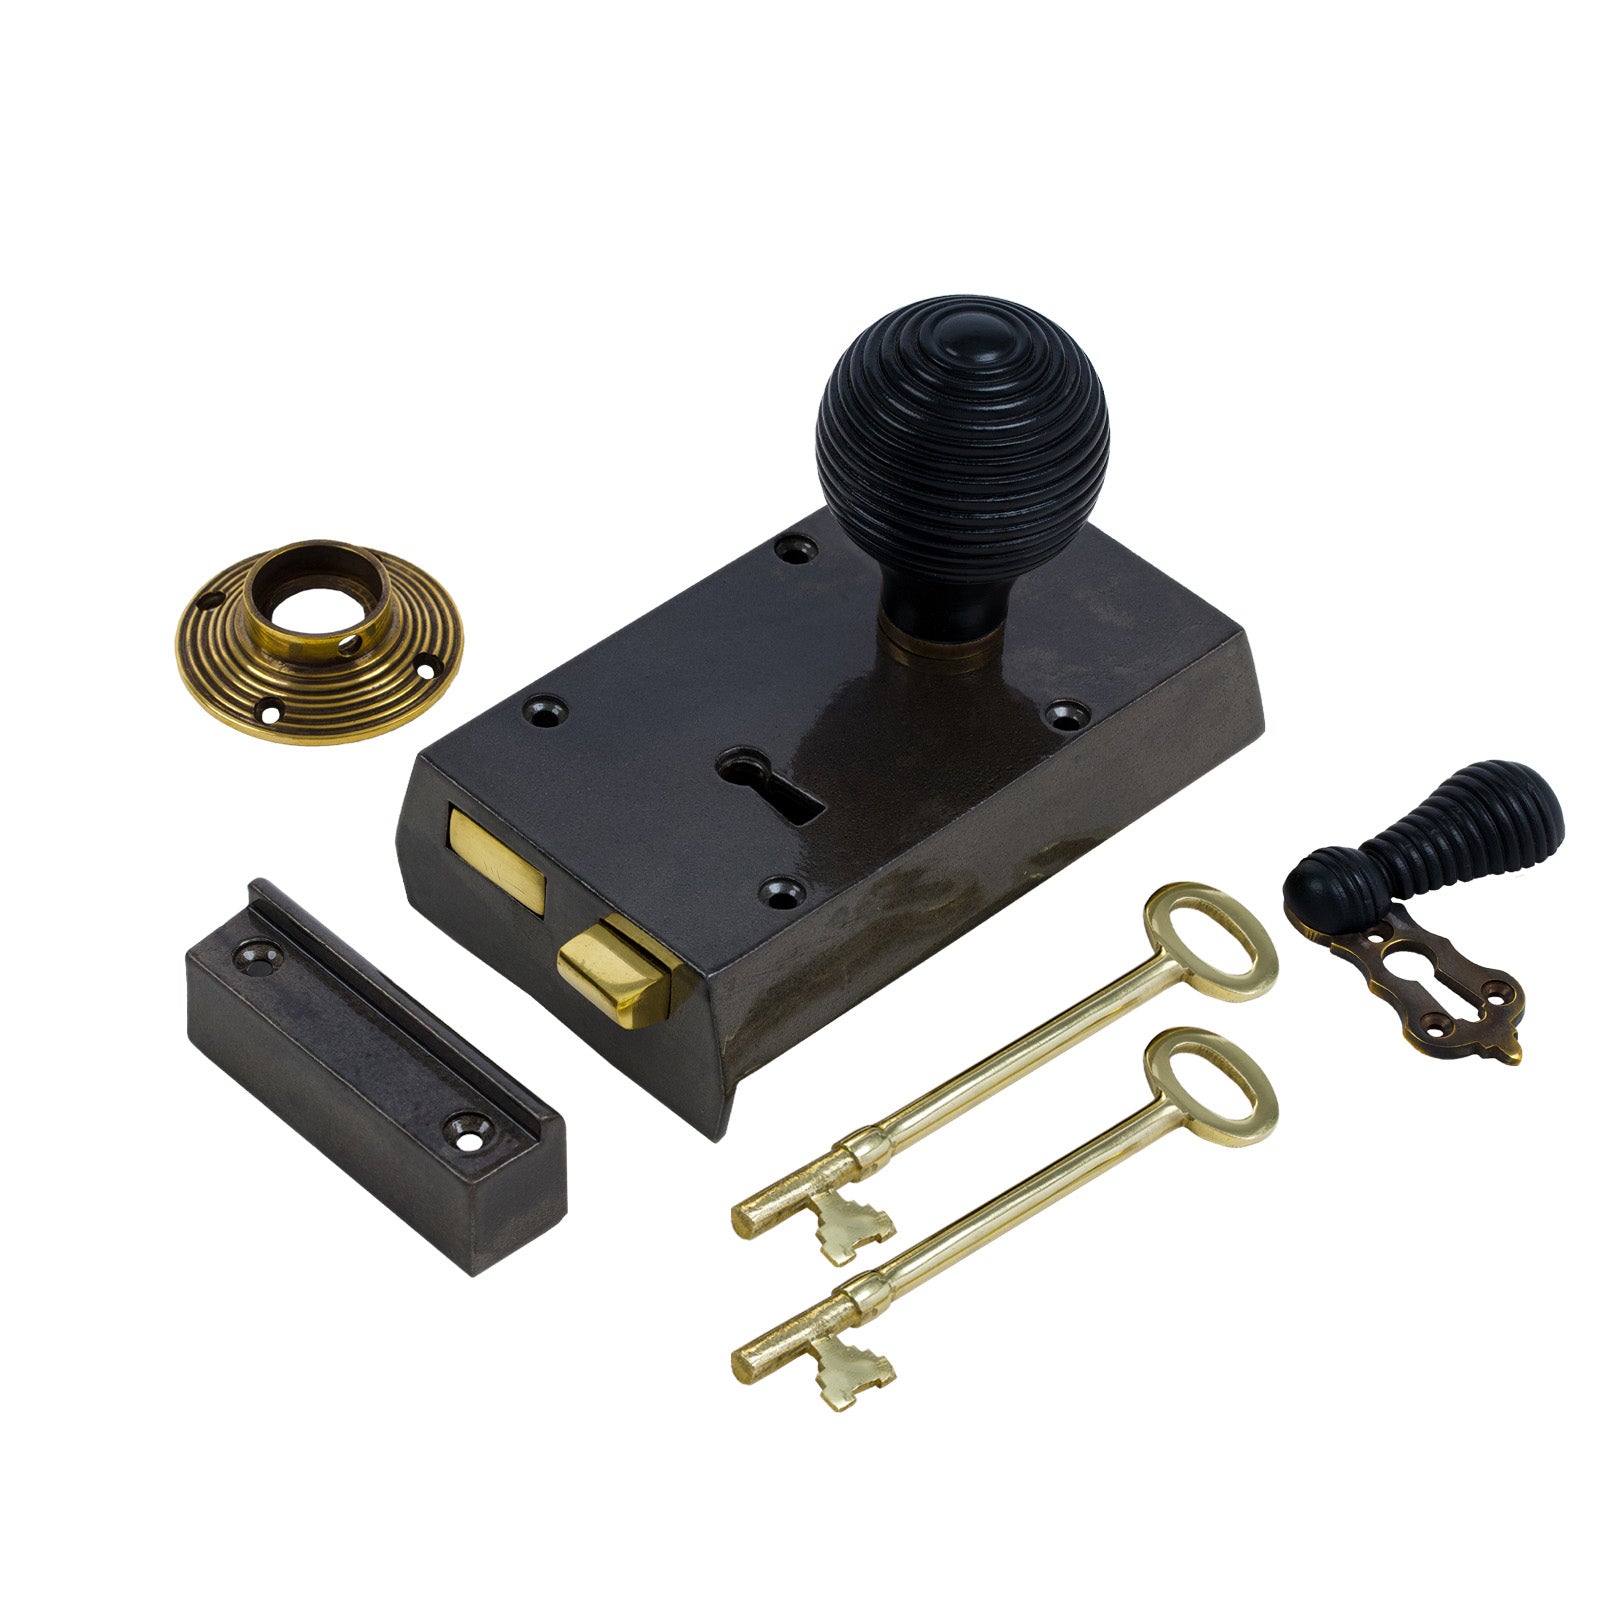 SHOW Right Handed Small Cast Iron Rim Lock With Beehive Door Knob Set - Ebonised